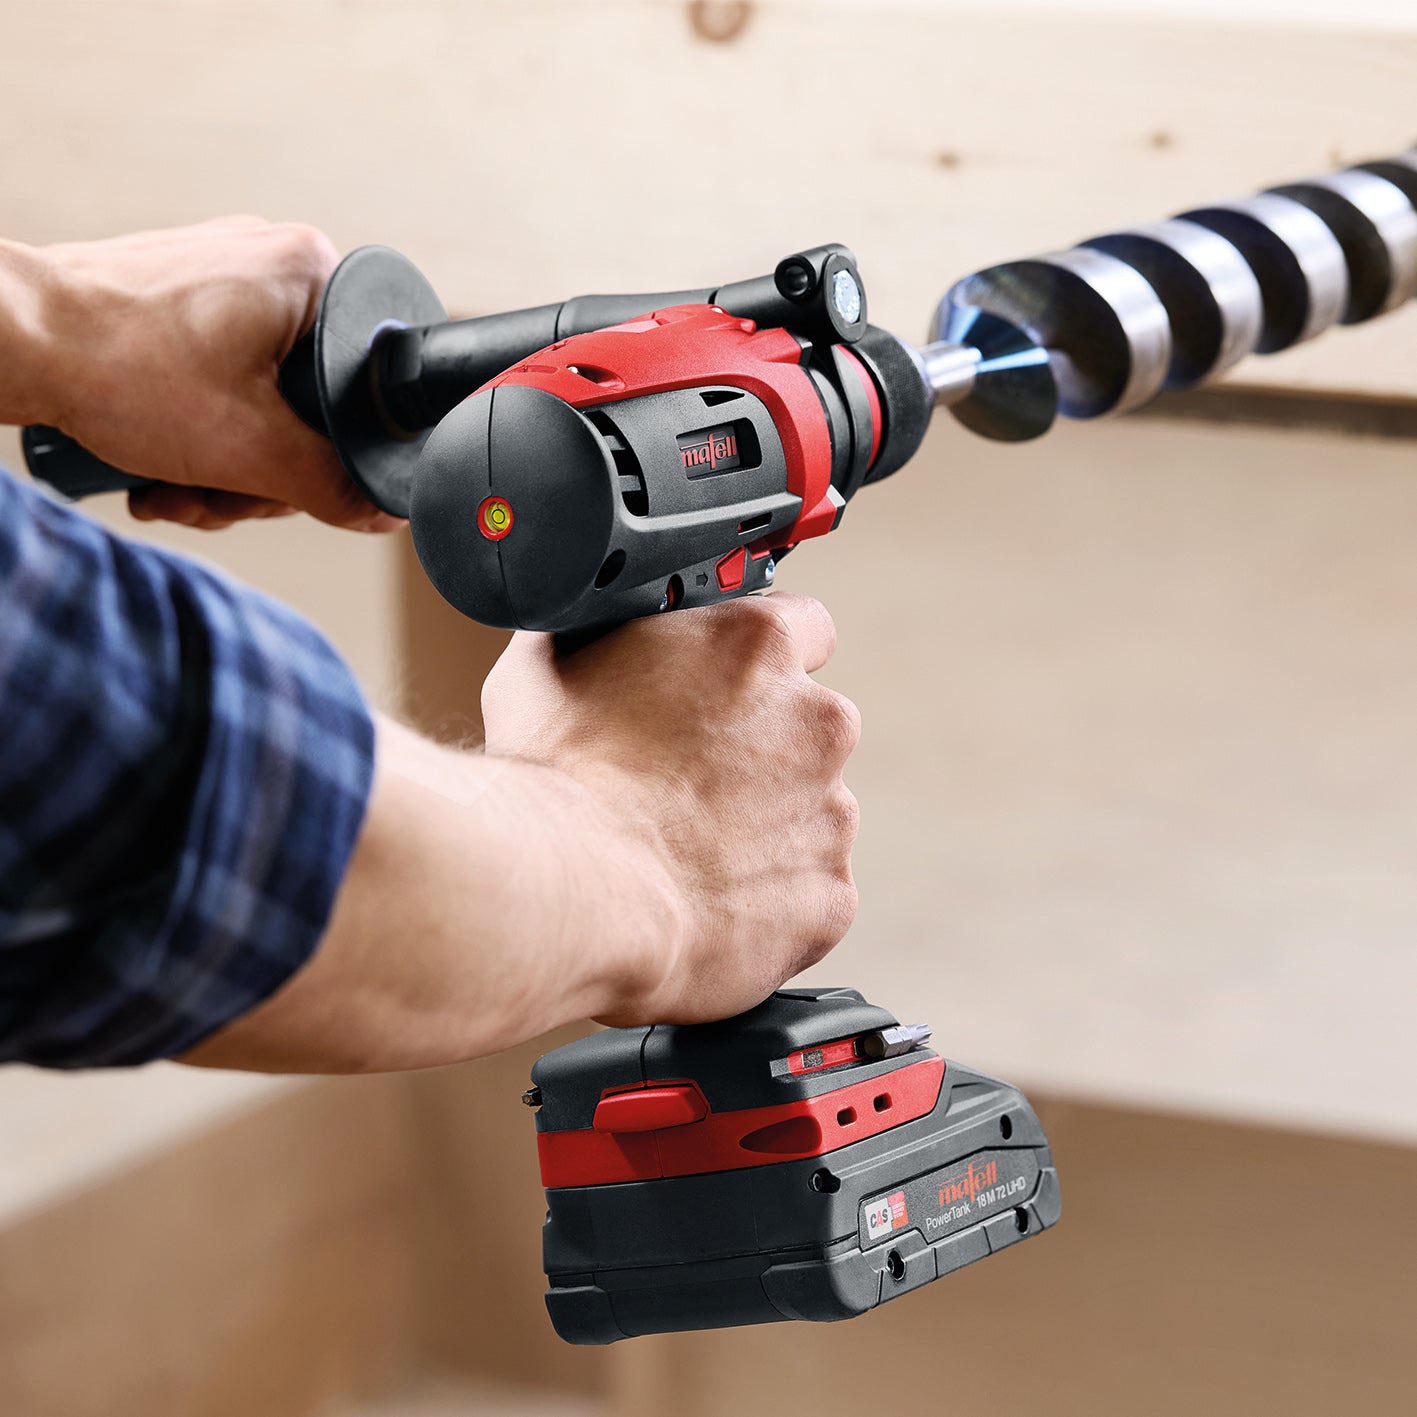 ASB 18MBL Pure Cordless Combi drill driver, (Excludes Batts & Charger)